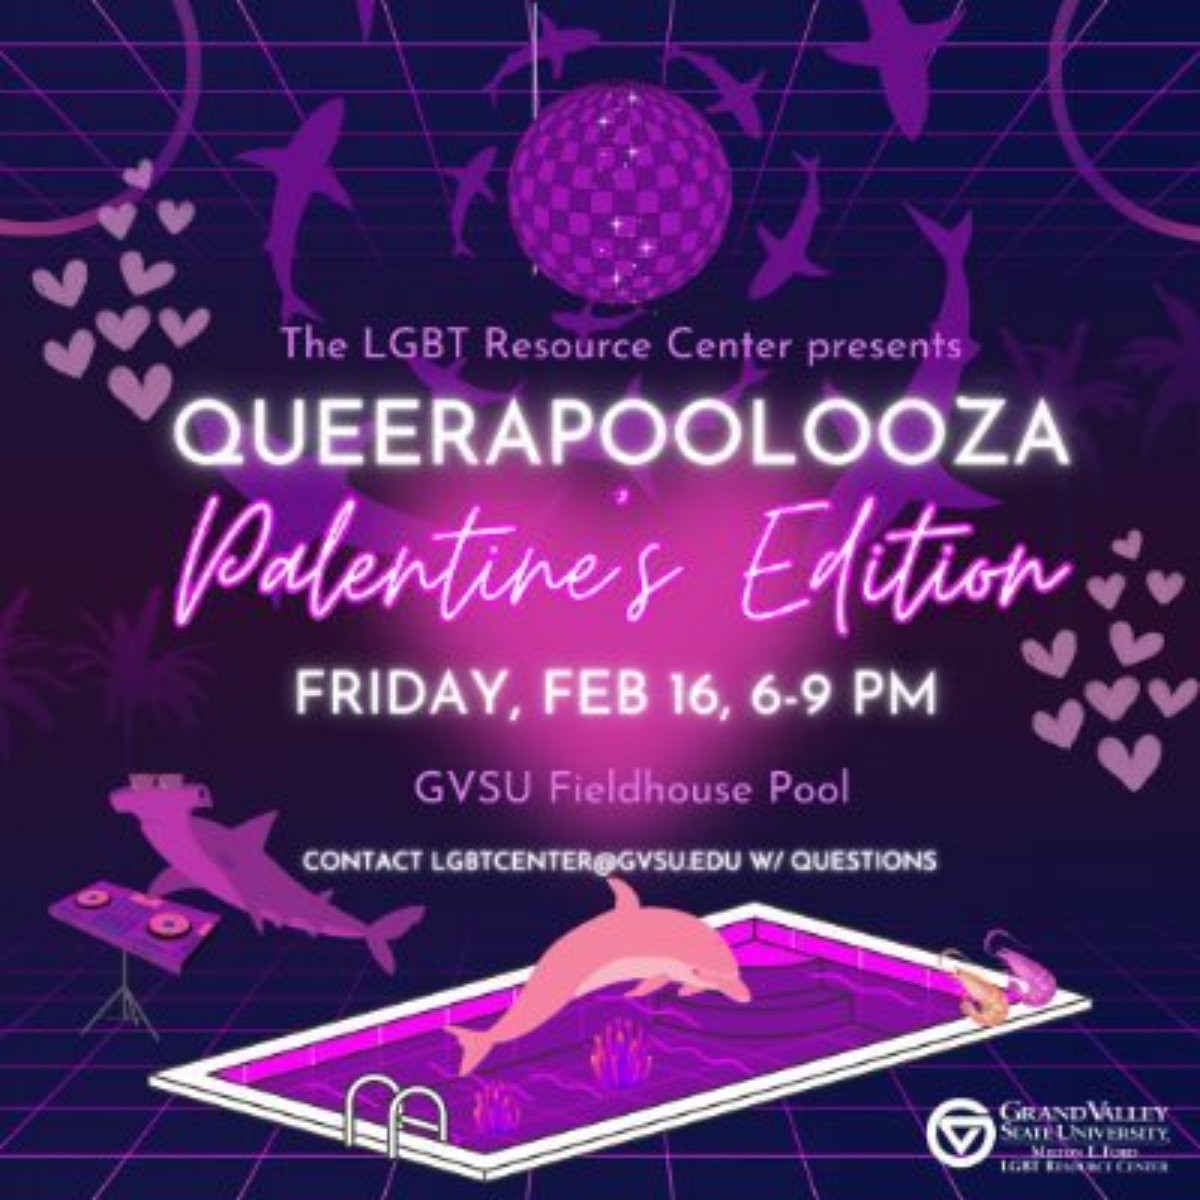 A graphic with sharks and dolphins a mirrorball and words that say The LGBT Resource Center Presents Queerapoolooa Valentine's Edition Friday, Feb 16, 6-9 pm GVSU Fieldhouse Pool Contact LGBTCenter@gvsu.edu with questions